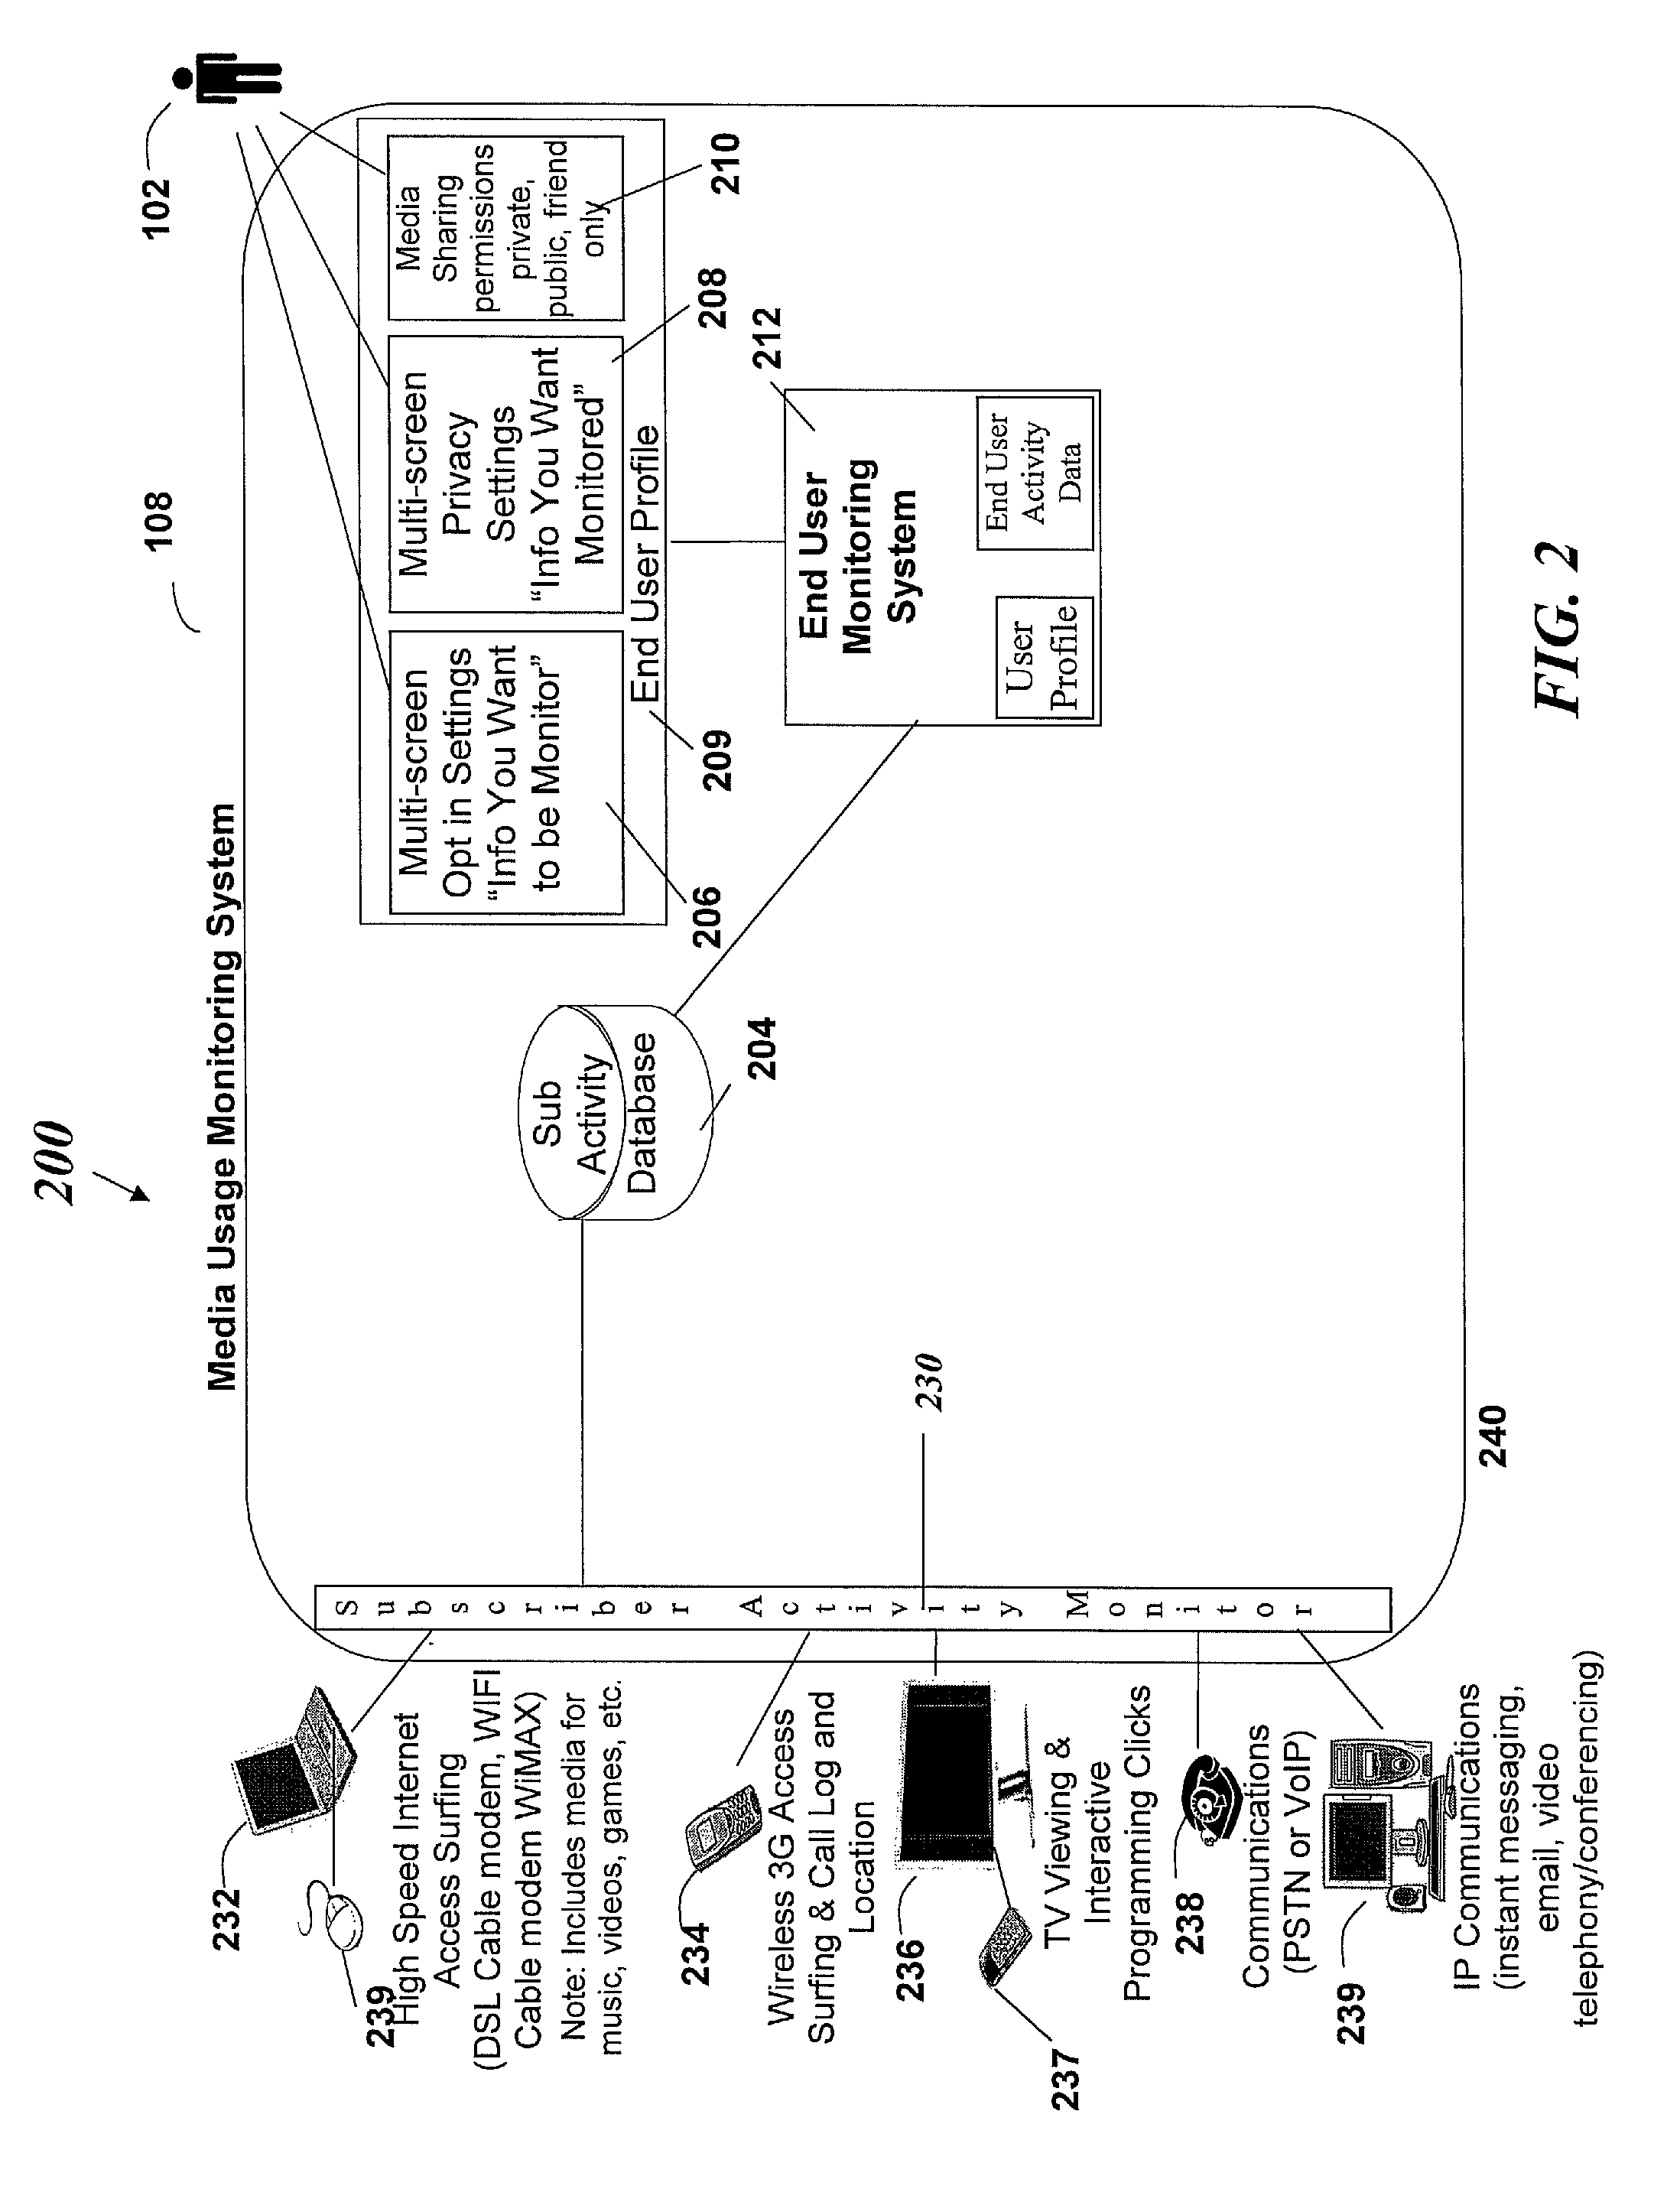 System and method for displaying media usage